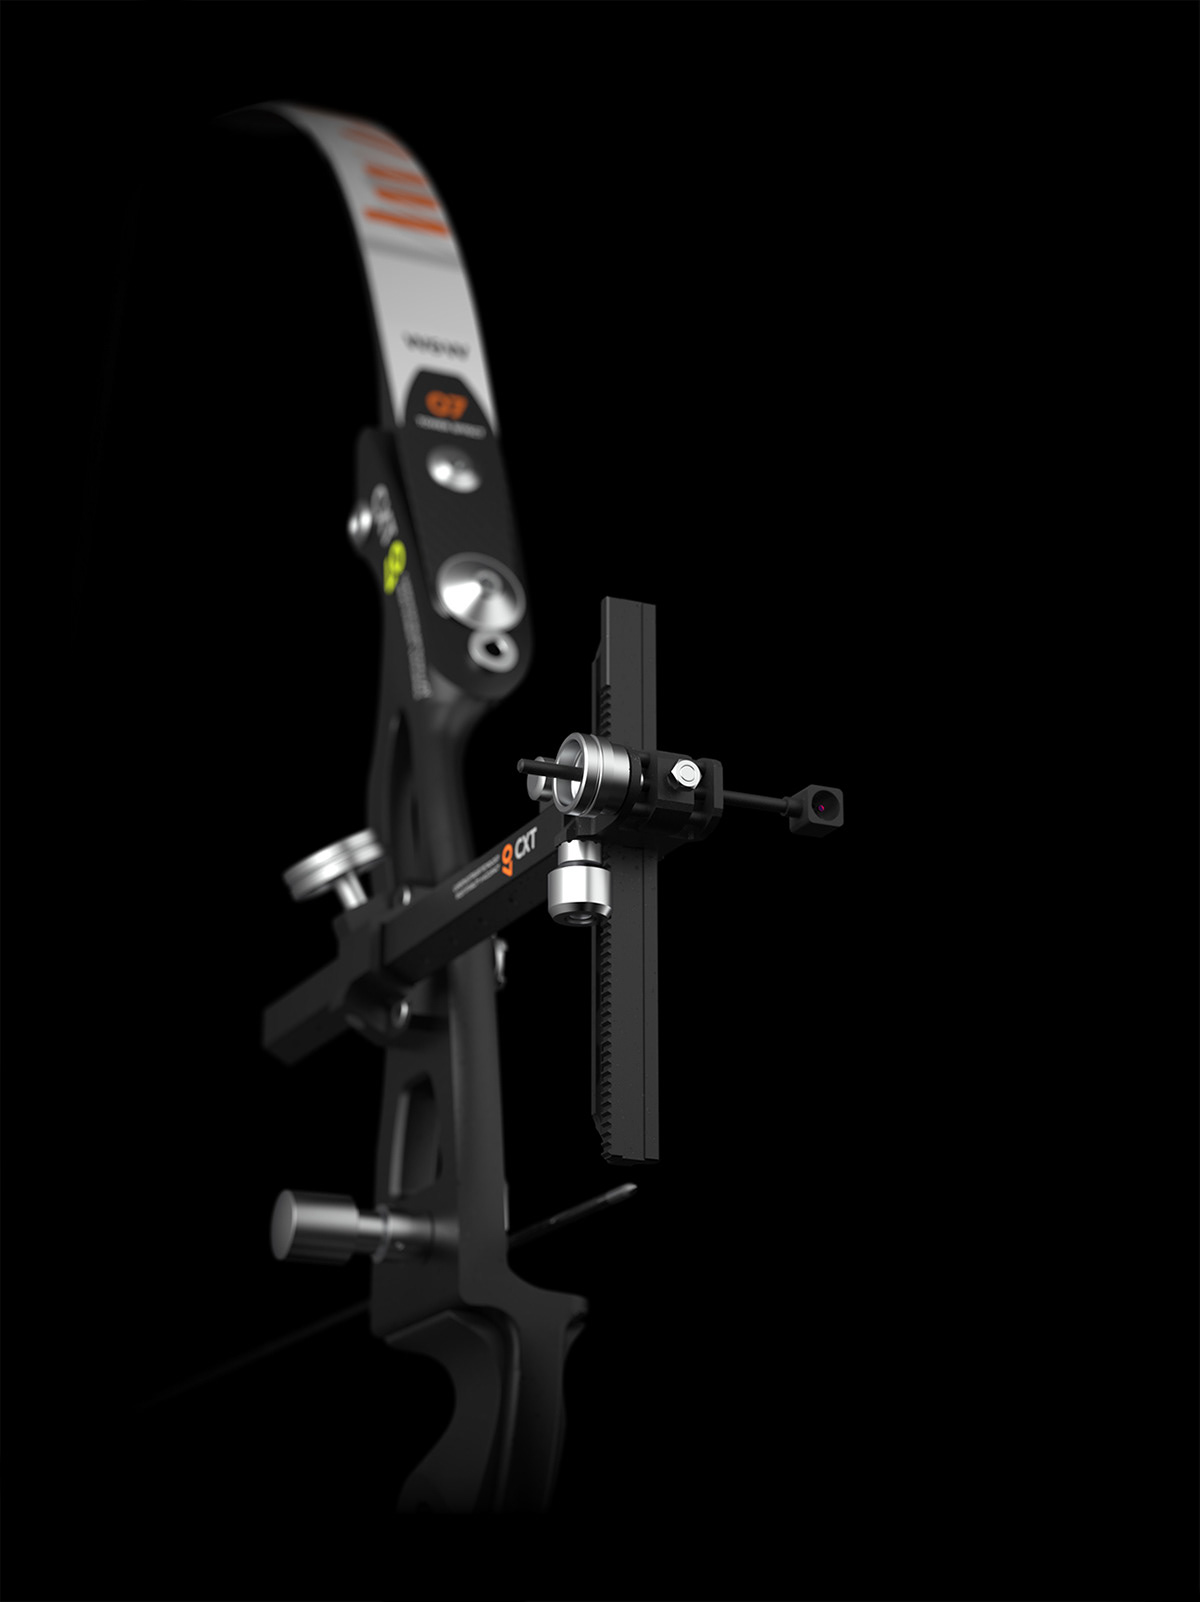 Archery gym industrial design  Leisure lifestyle Olympics product design  Render sports superkomma